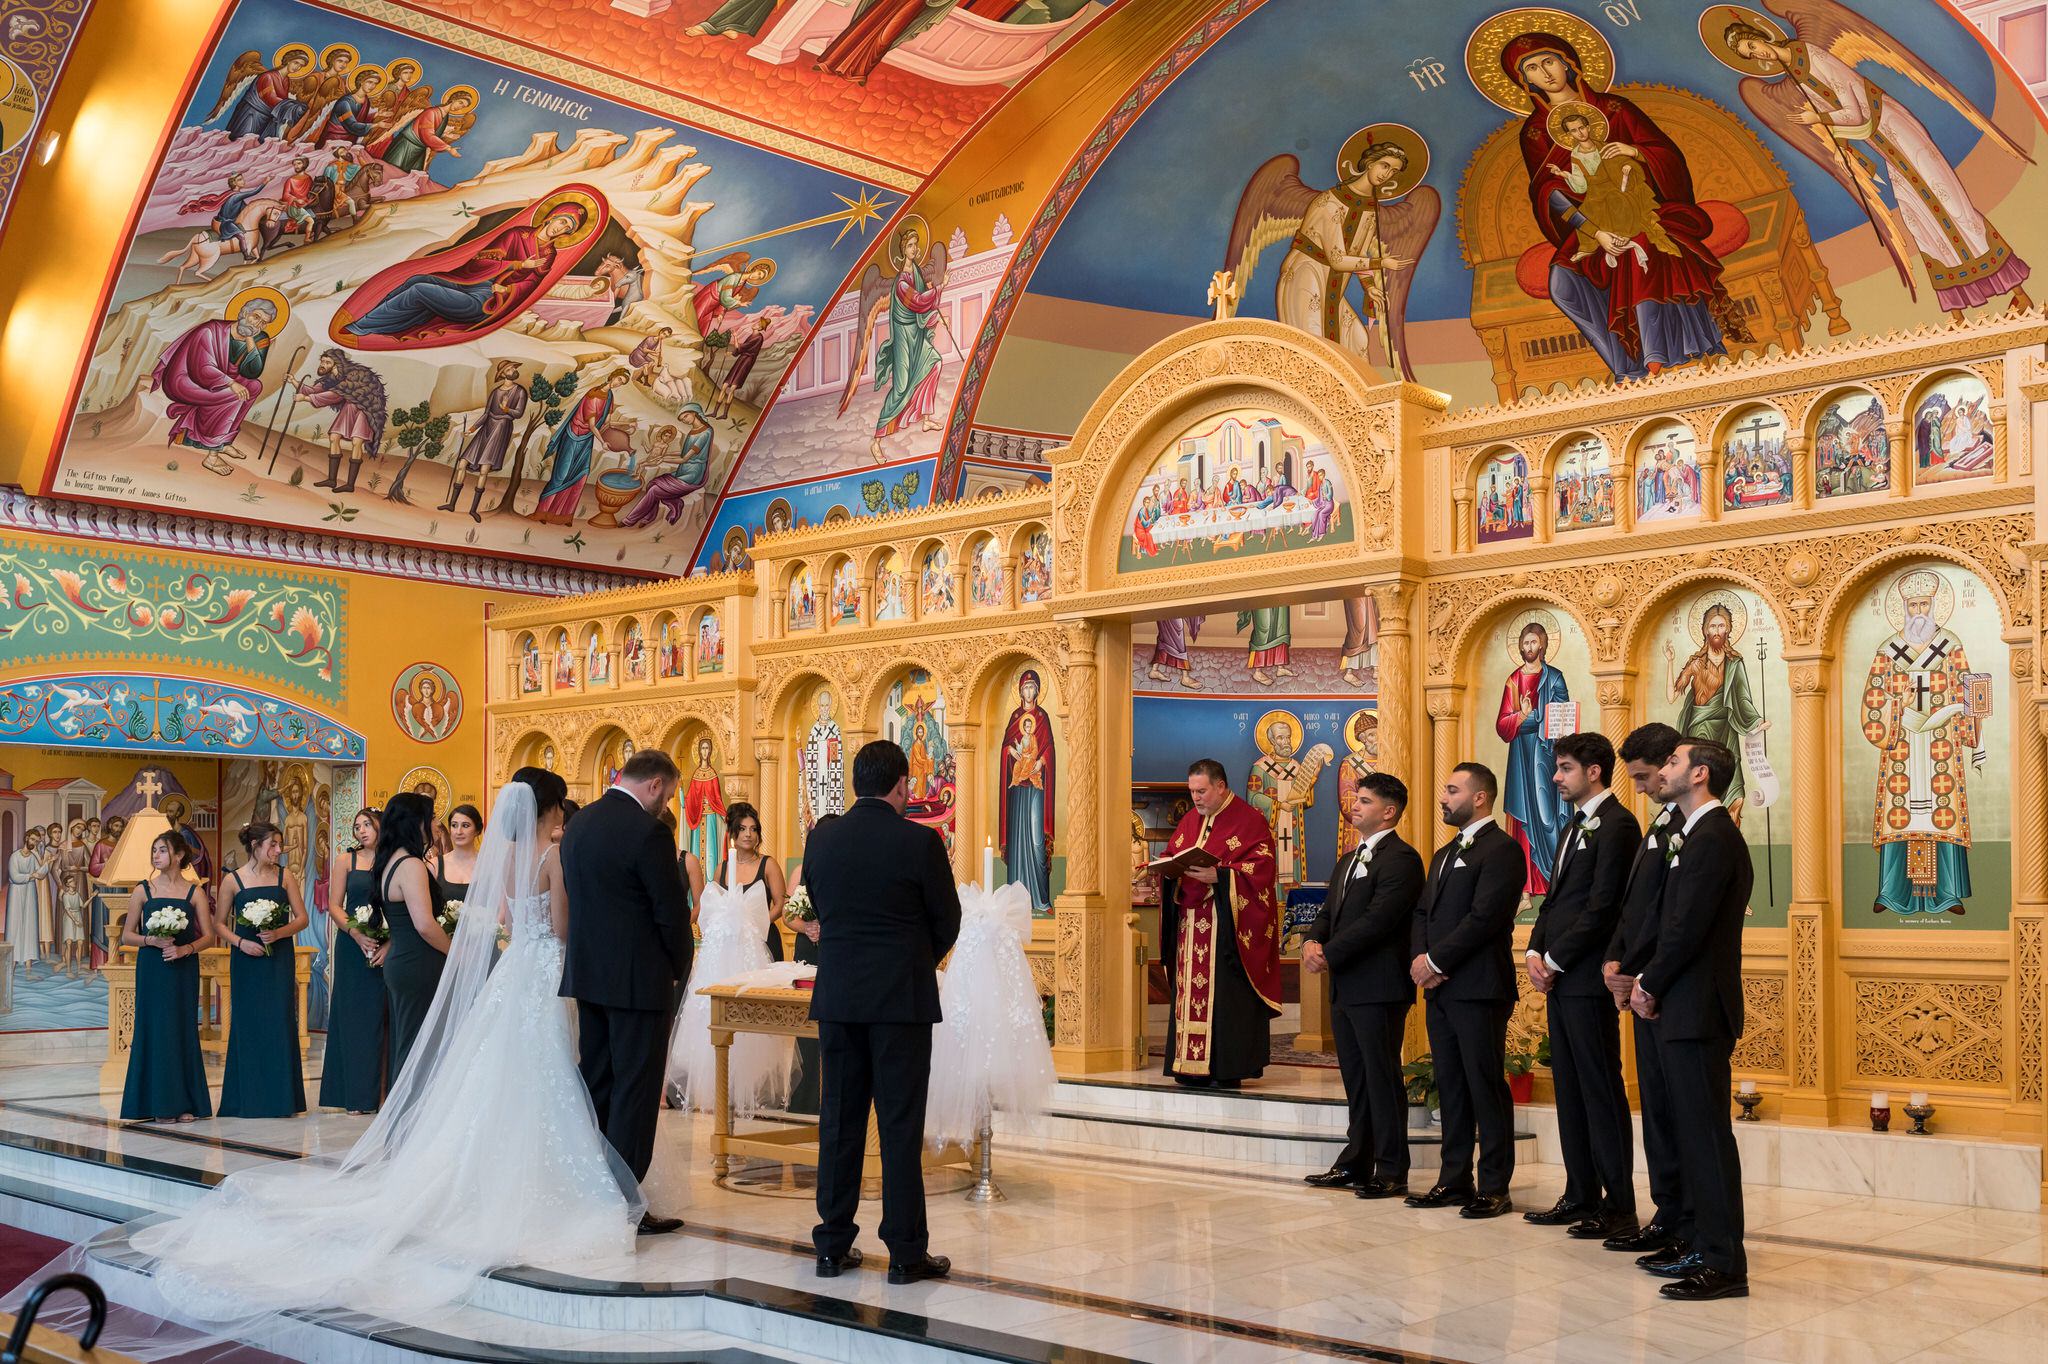 A wedding party stands at the altar of a Assumption Greek Orthodox wedding in St. Clair Shores, Michigan.